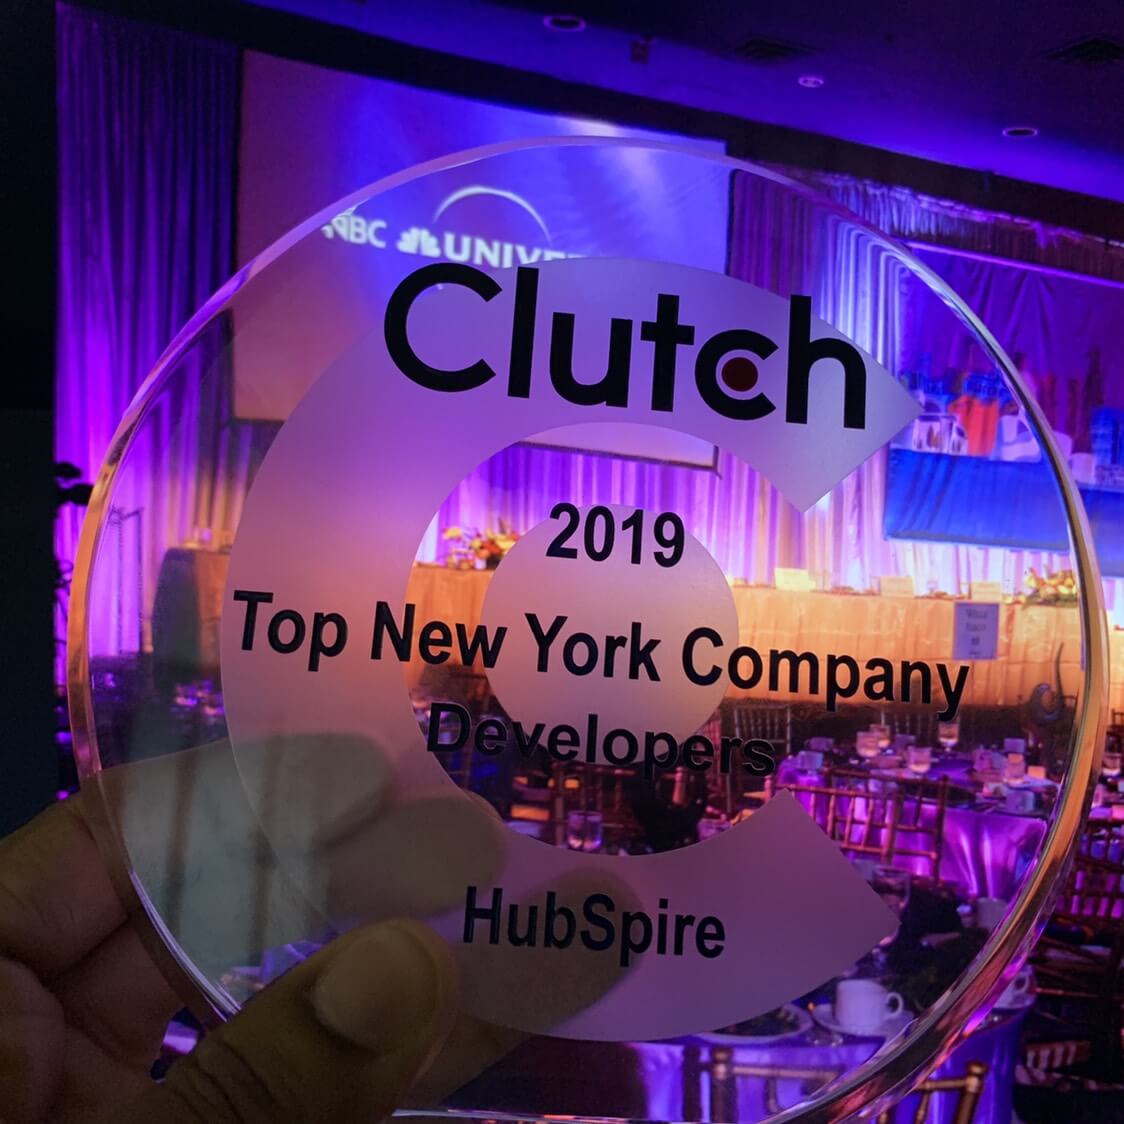 2019 Top Developers in NY Awarded to HubSpire